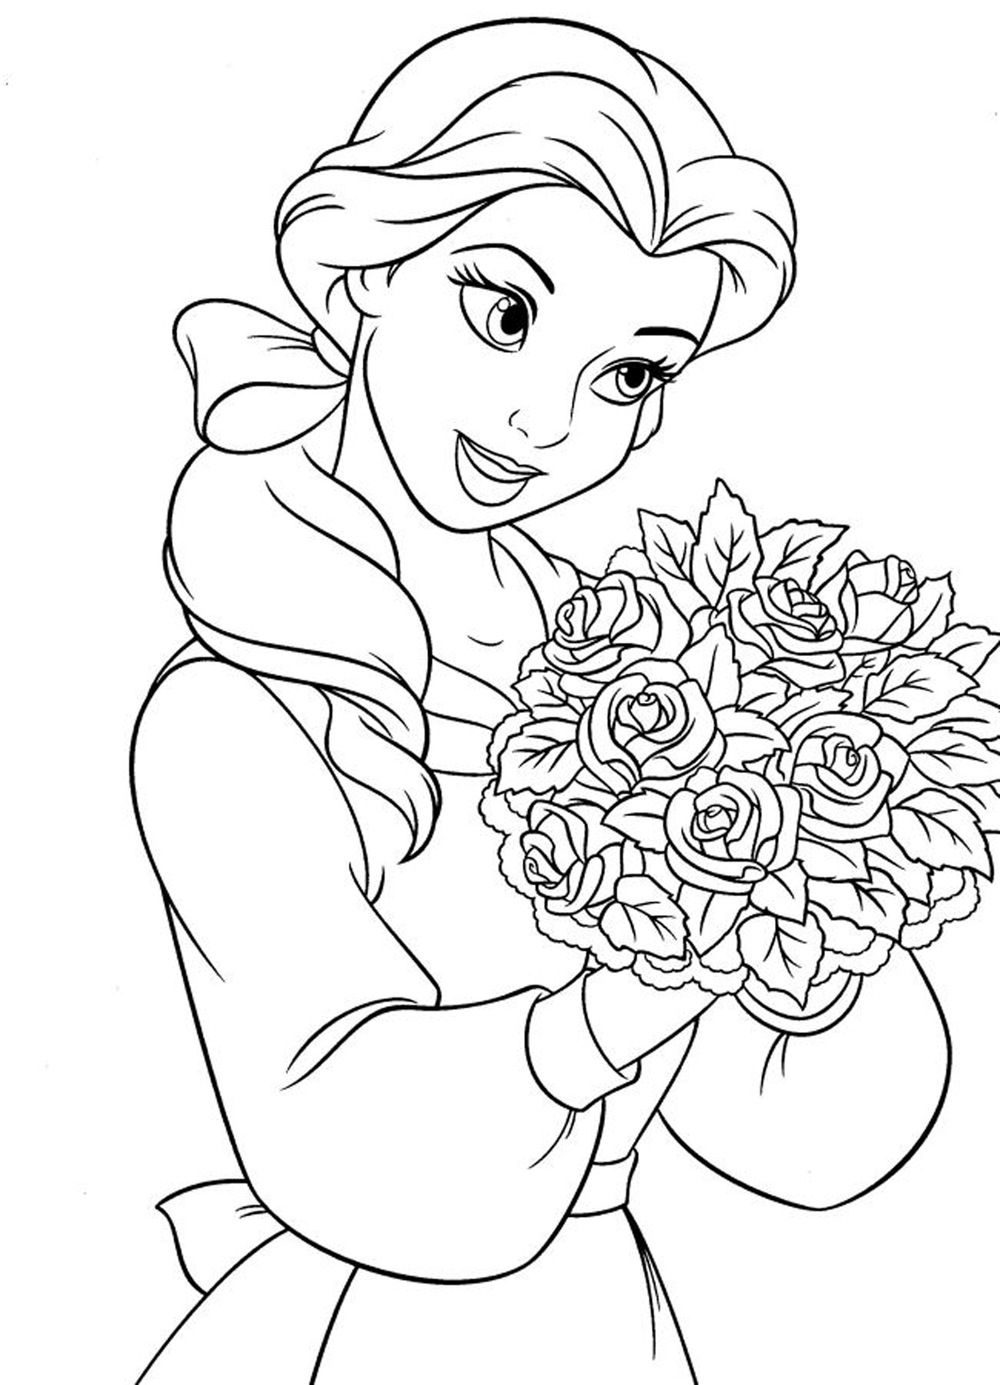 Coloring Pages For Girls Disney Princess | Cartoon Coloring pages ...